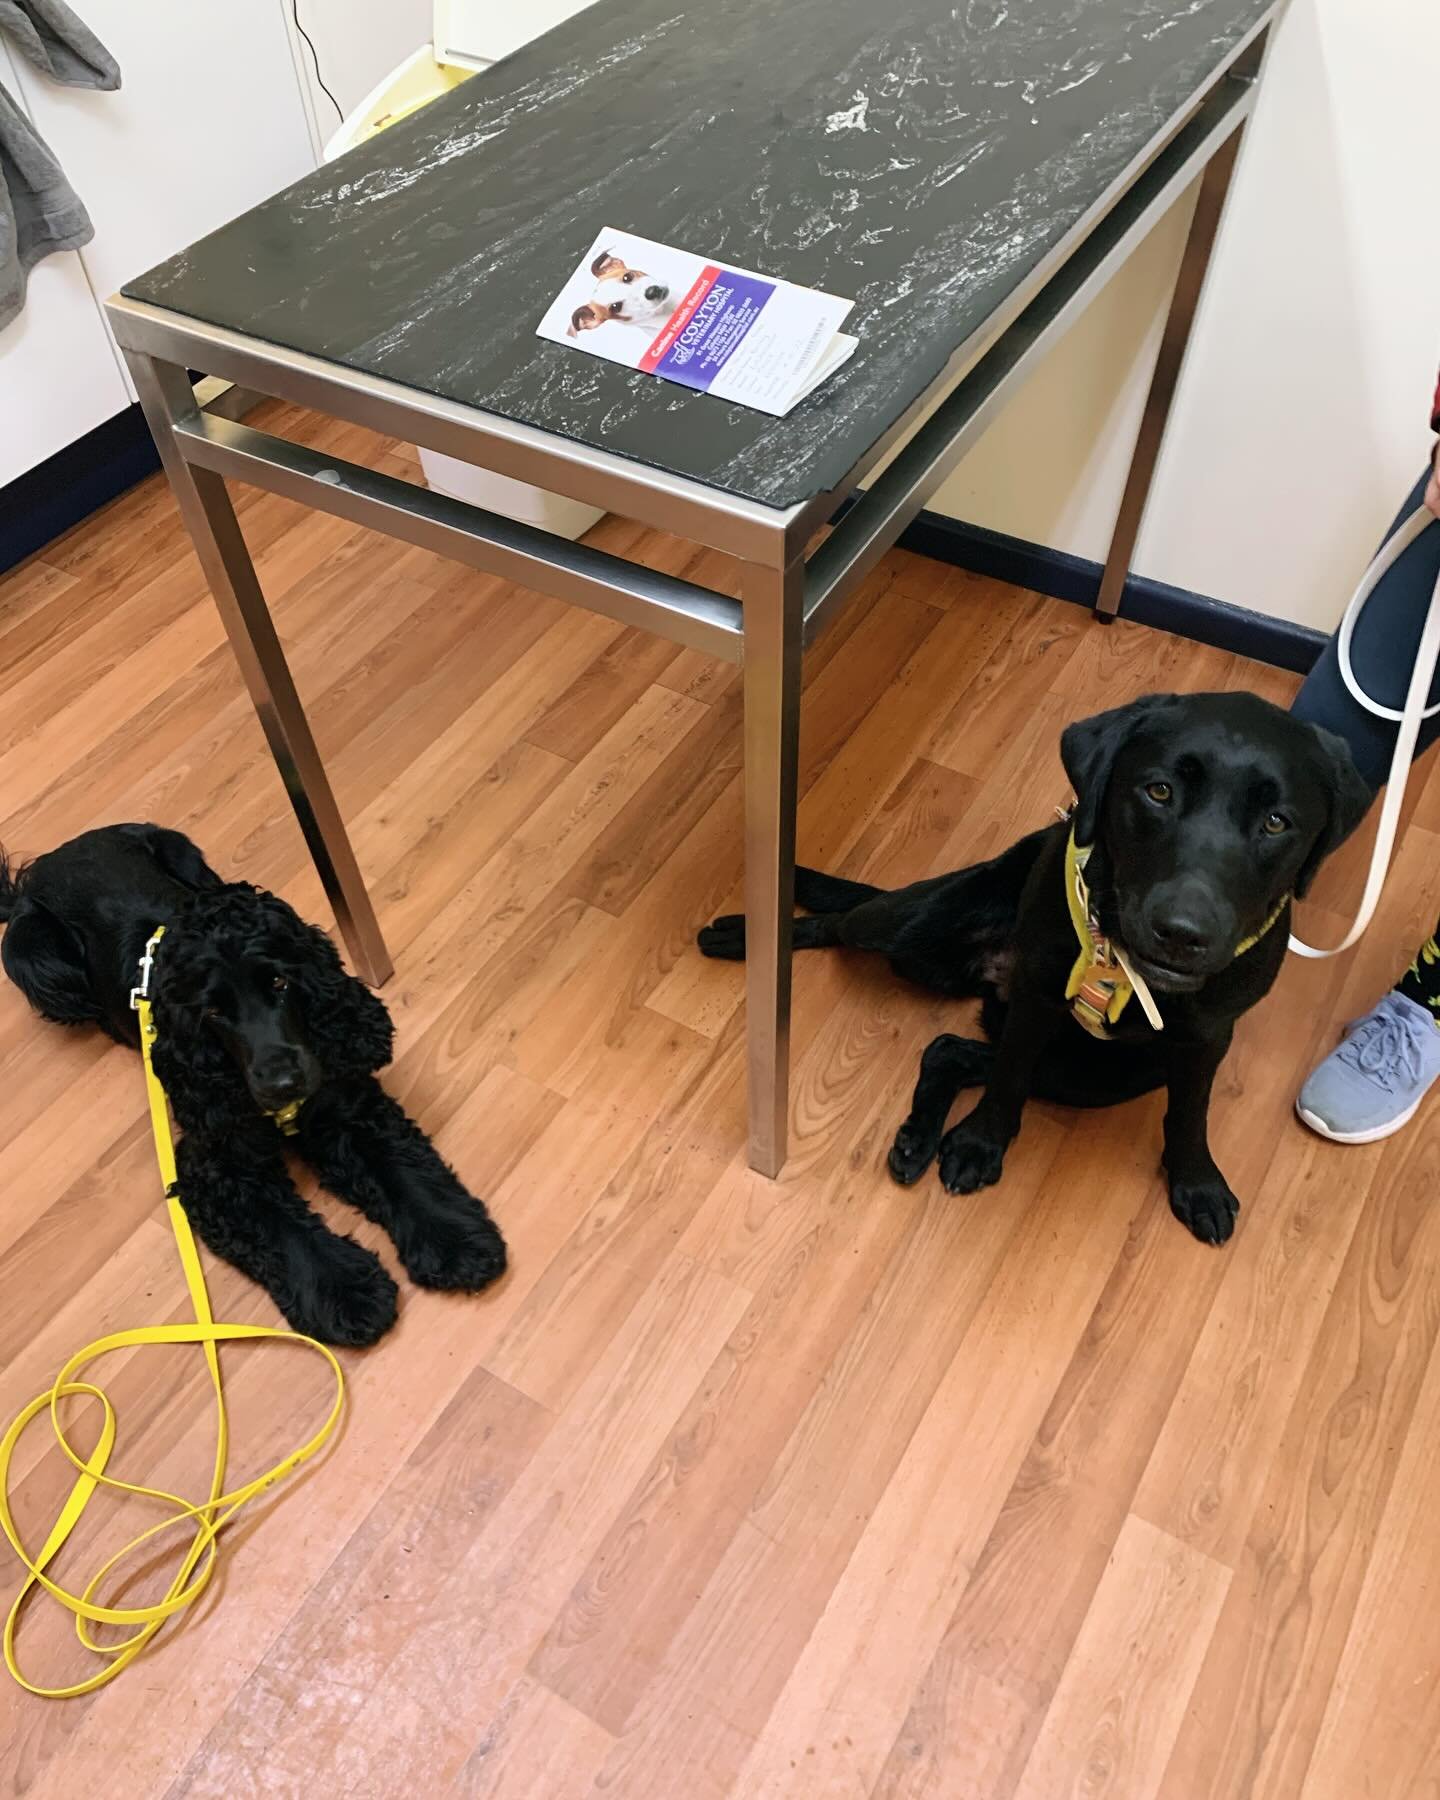 Beautiful Bailey and Freddie at the vet for their annual vaccines. The vet was super impressed with their friendly, calm natures, and how athletic and fit they both are. He absolutely loved them 😊

#dogsofinstagram #doggo #dog #labradorsofinstagram 